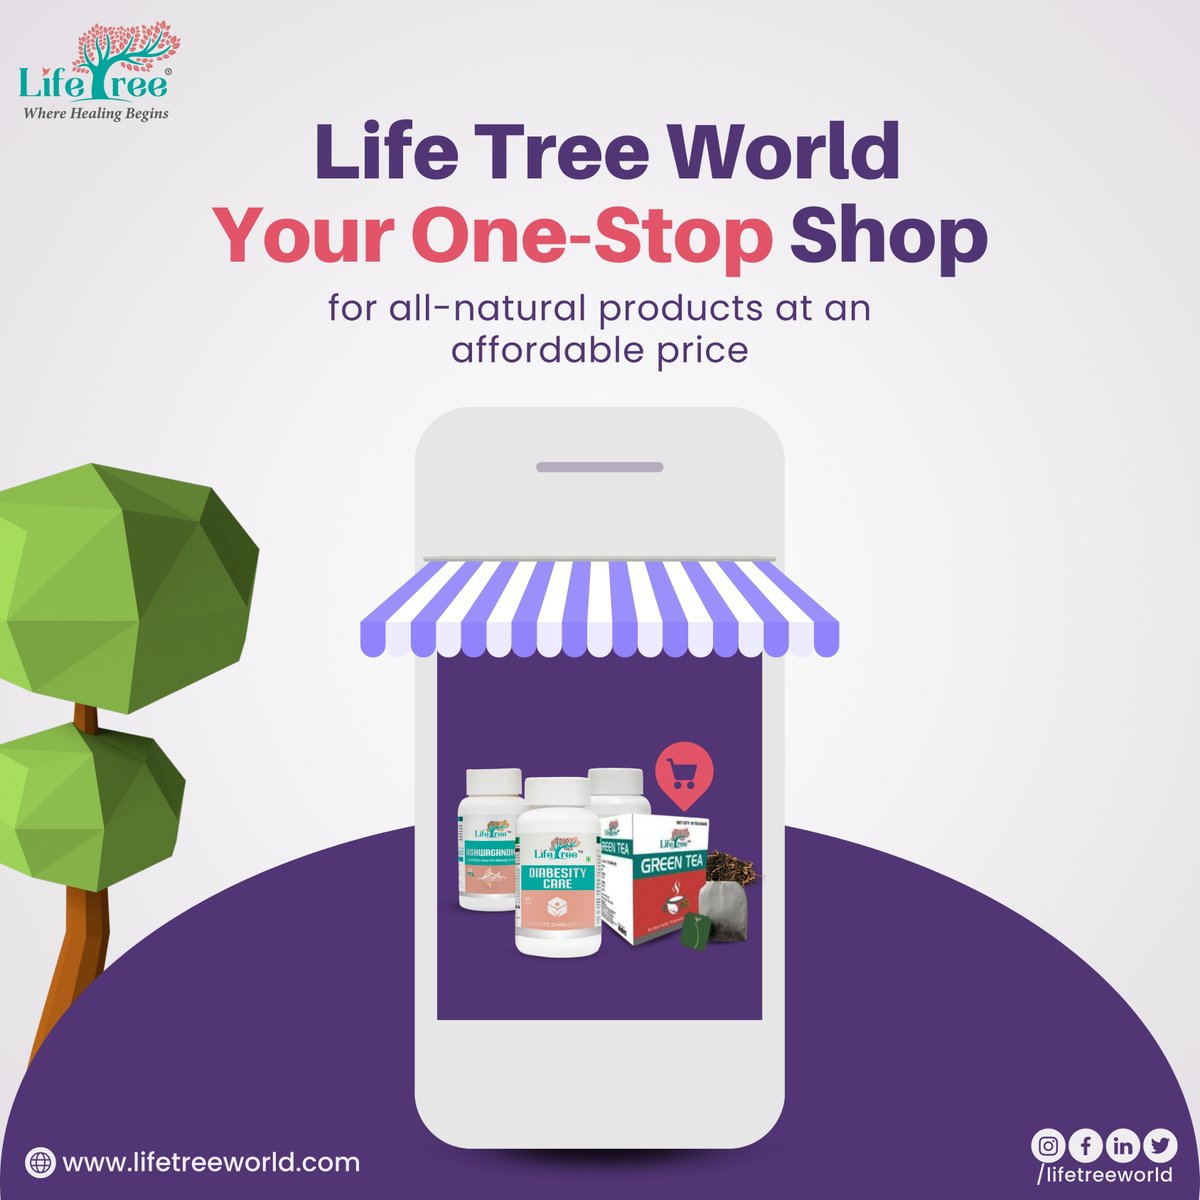 We have all-natural products or supplements that you need daily.

Check out our store at - lifetreeworld.com
.
.
.
#allnaturalproducts #naturesupplements #wellnessjourney #healthylifestyle #naturepower #dailyessentials #selfcare #naturalwellness  #lifetreeworld